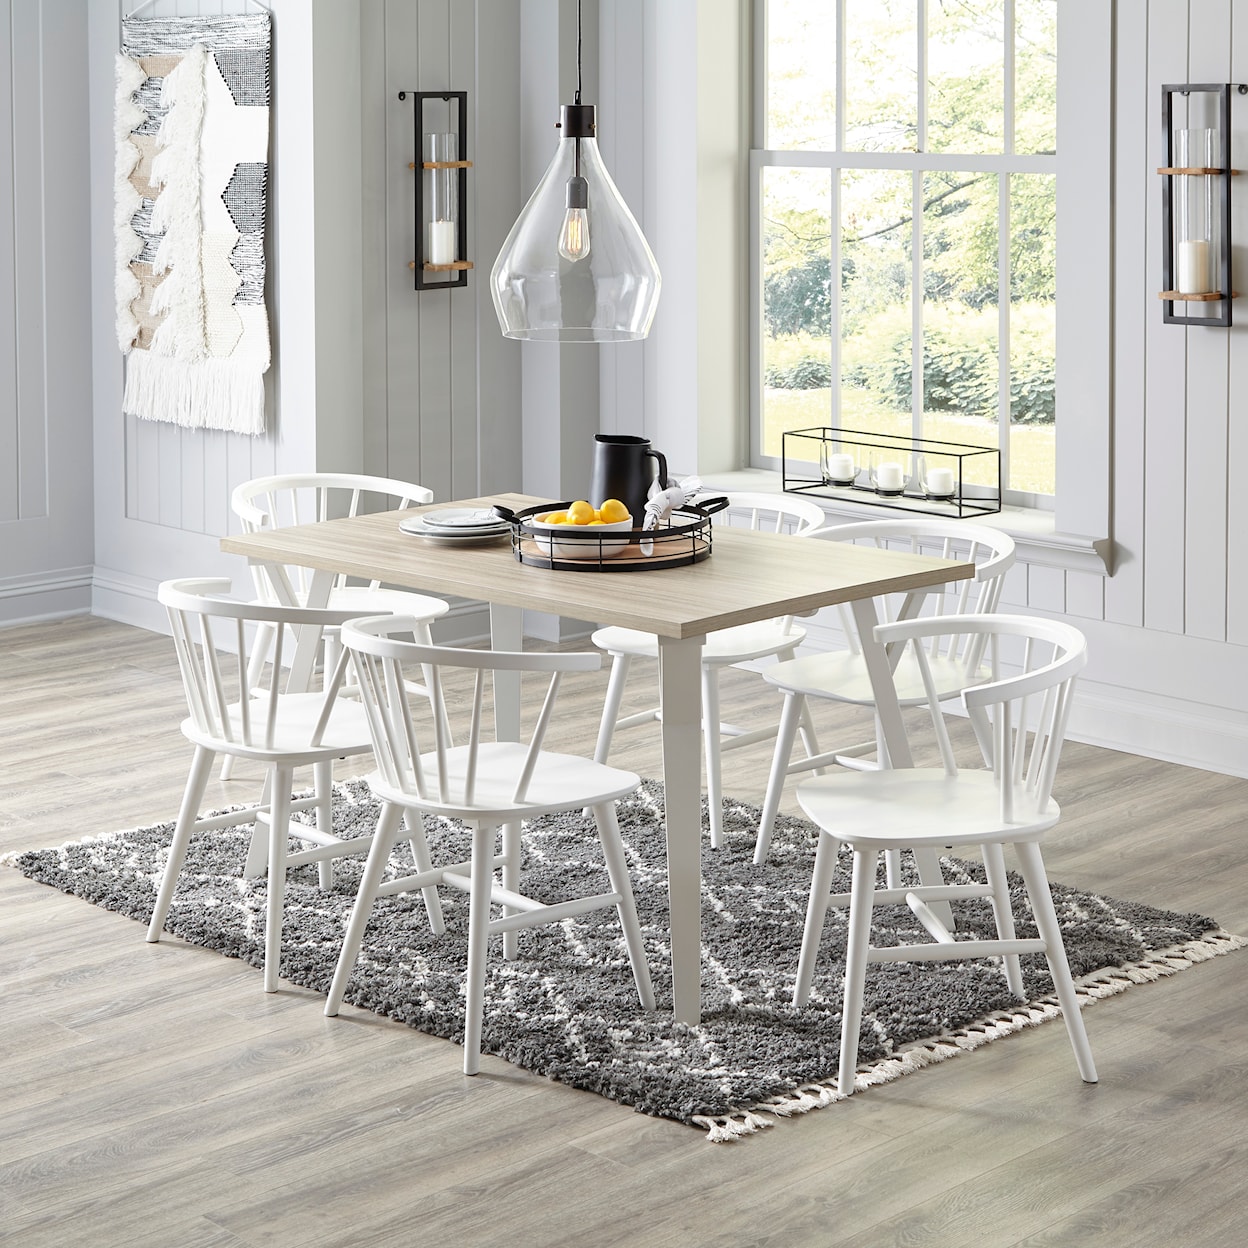 Ashley Furniture Signature Design Grannen Dining Table and 6 Chairs